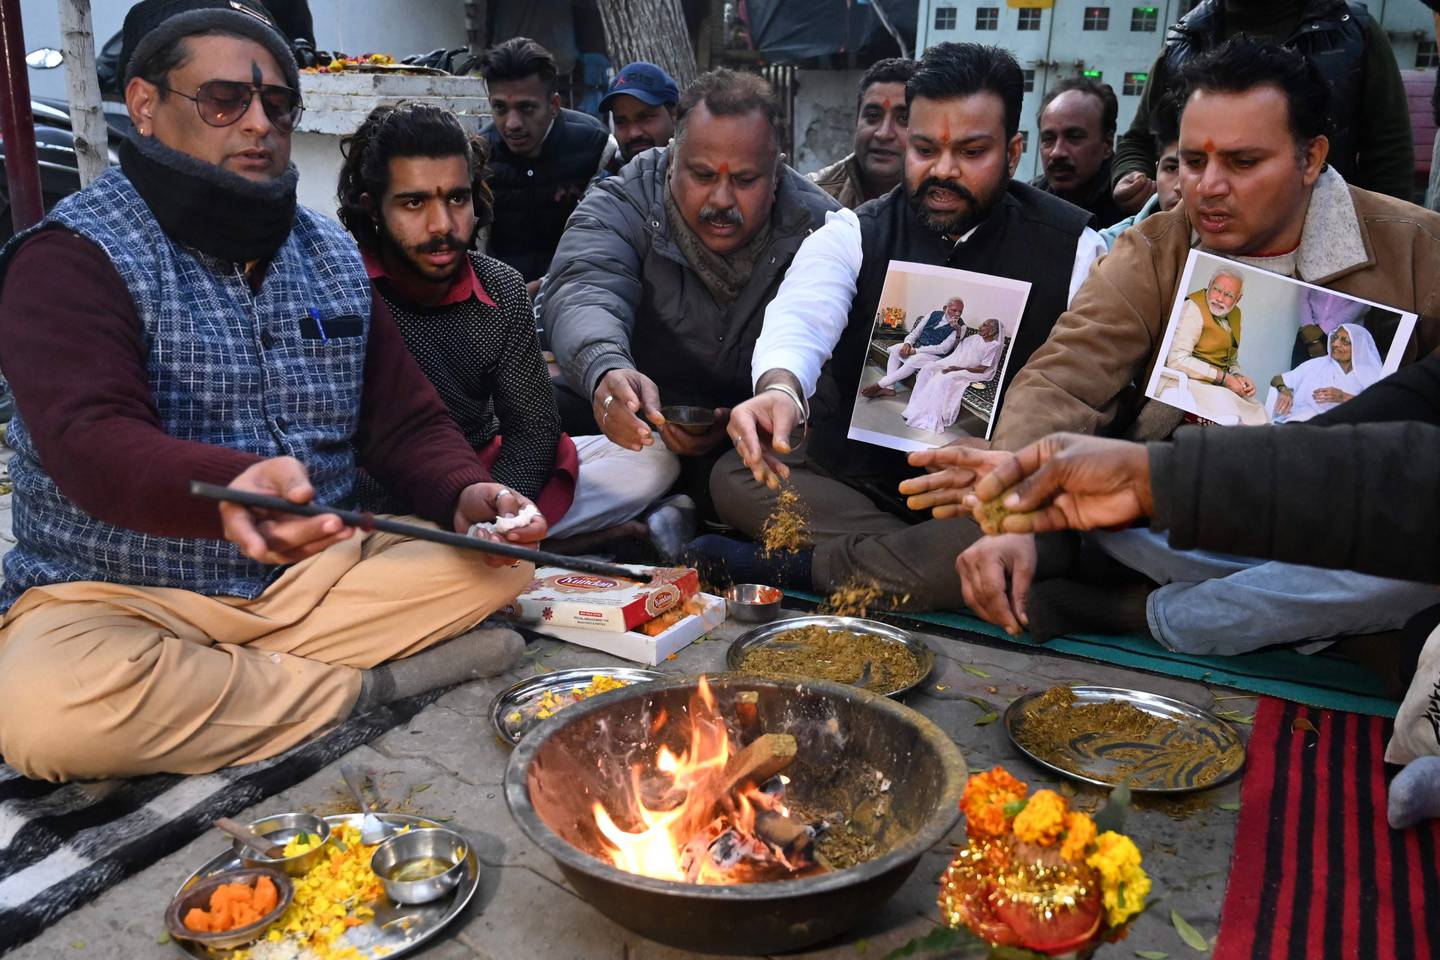 Supporters of Indian Prime Minister Narendra Modi's Bharatiya Janata Party gather at a Hindu temple in Amritsar to perform the havan ritual after Mr Modi's mother was admitted to hospital. AFP